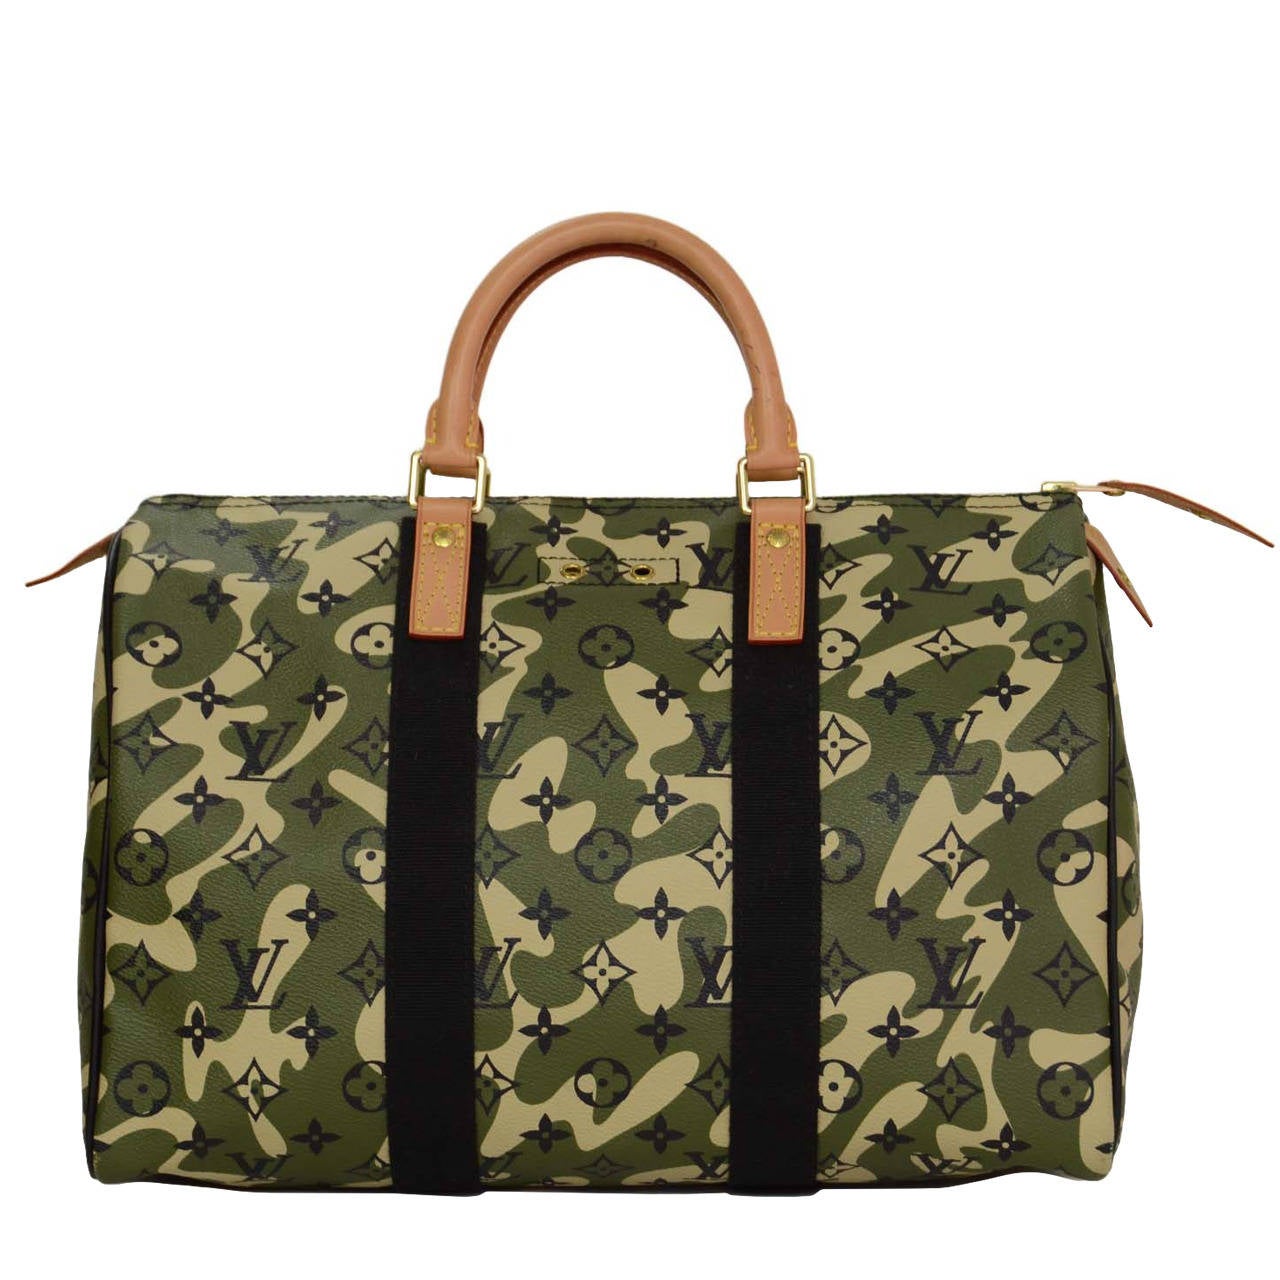 Louis Vuitton pre-owned Speedy 35 Camouflage Monogram Holdall